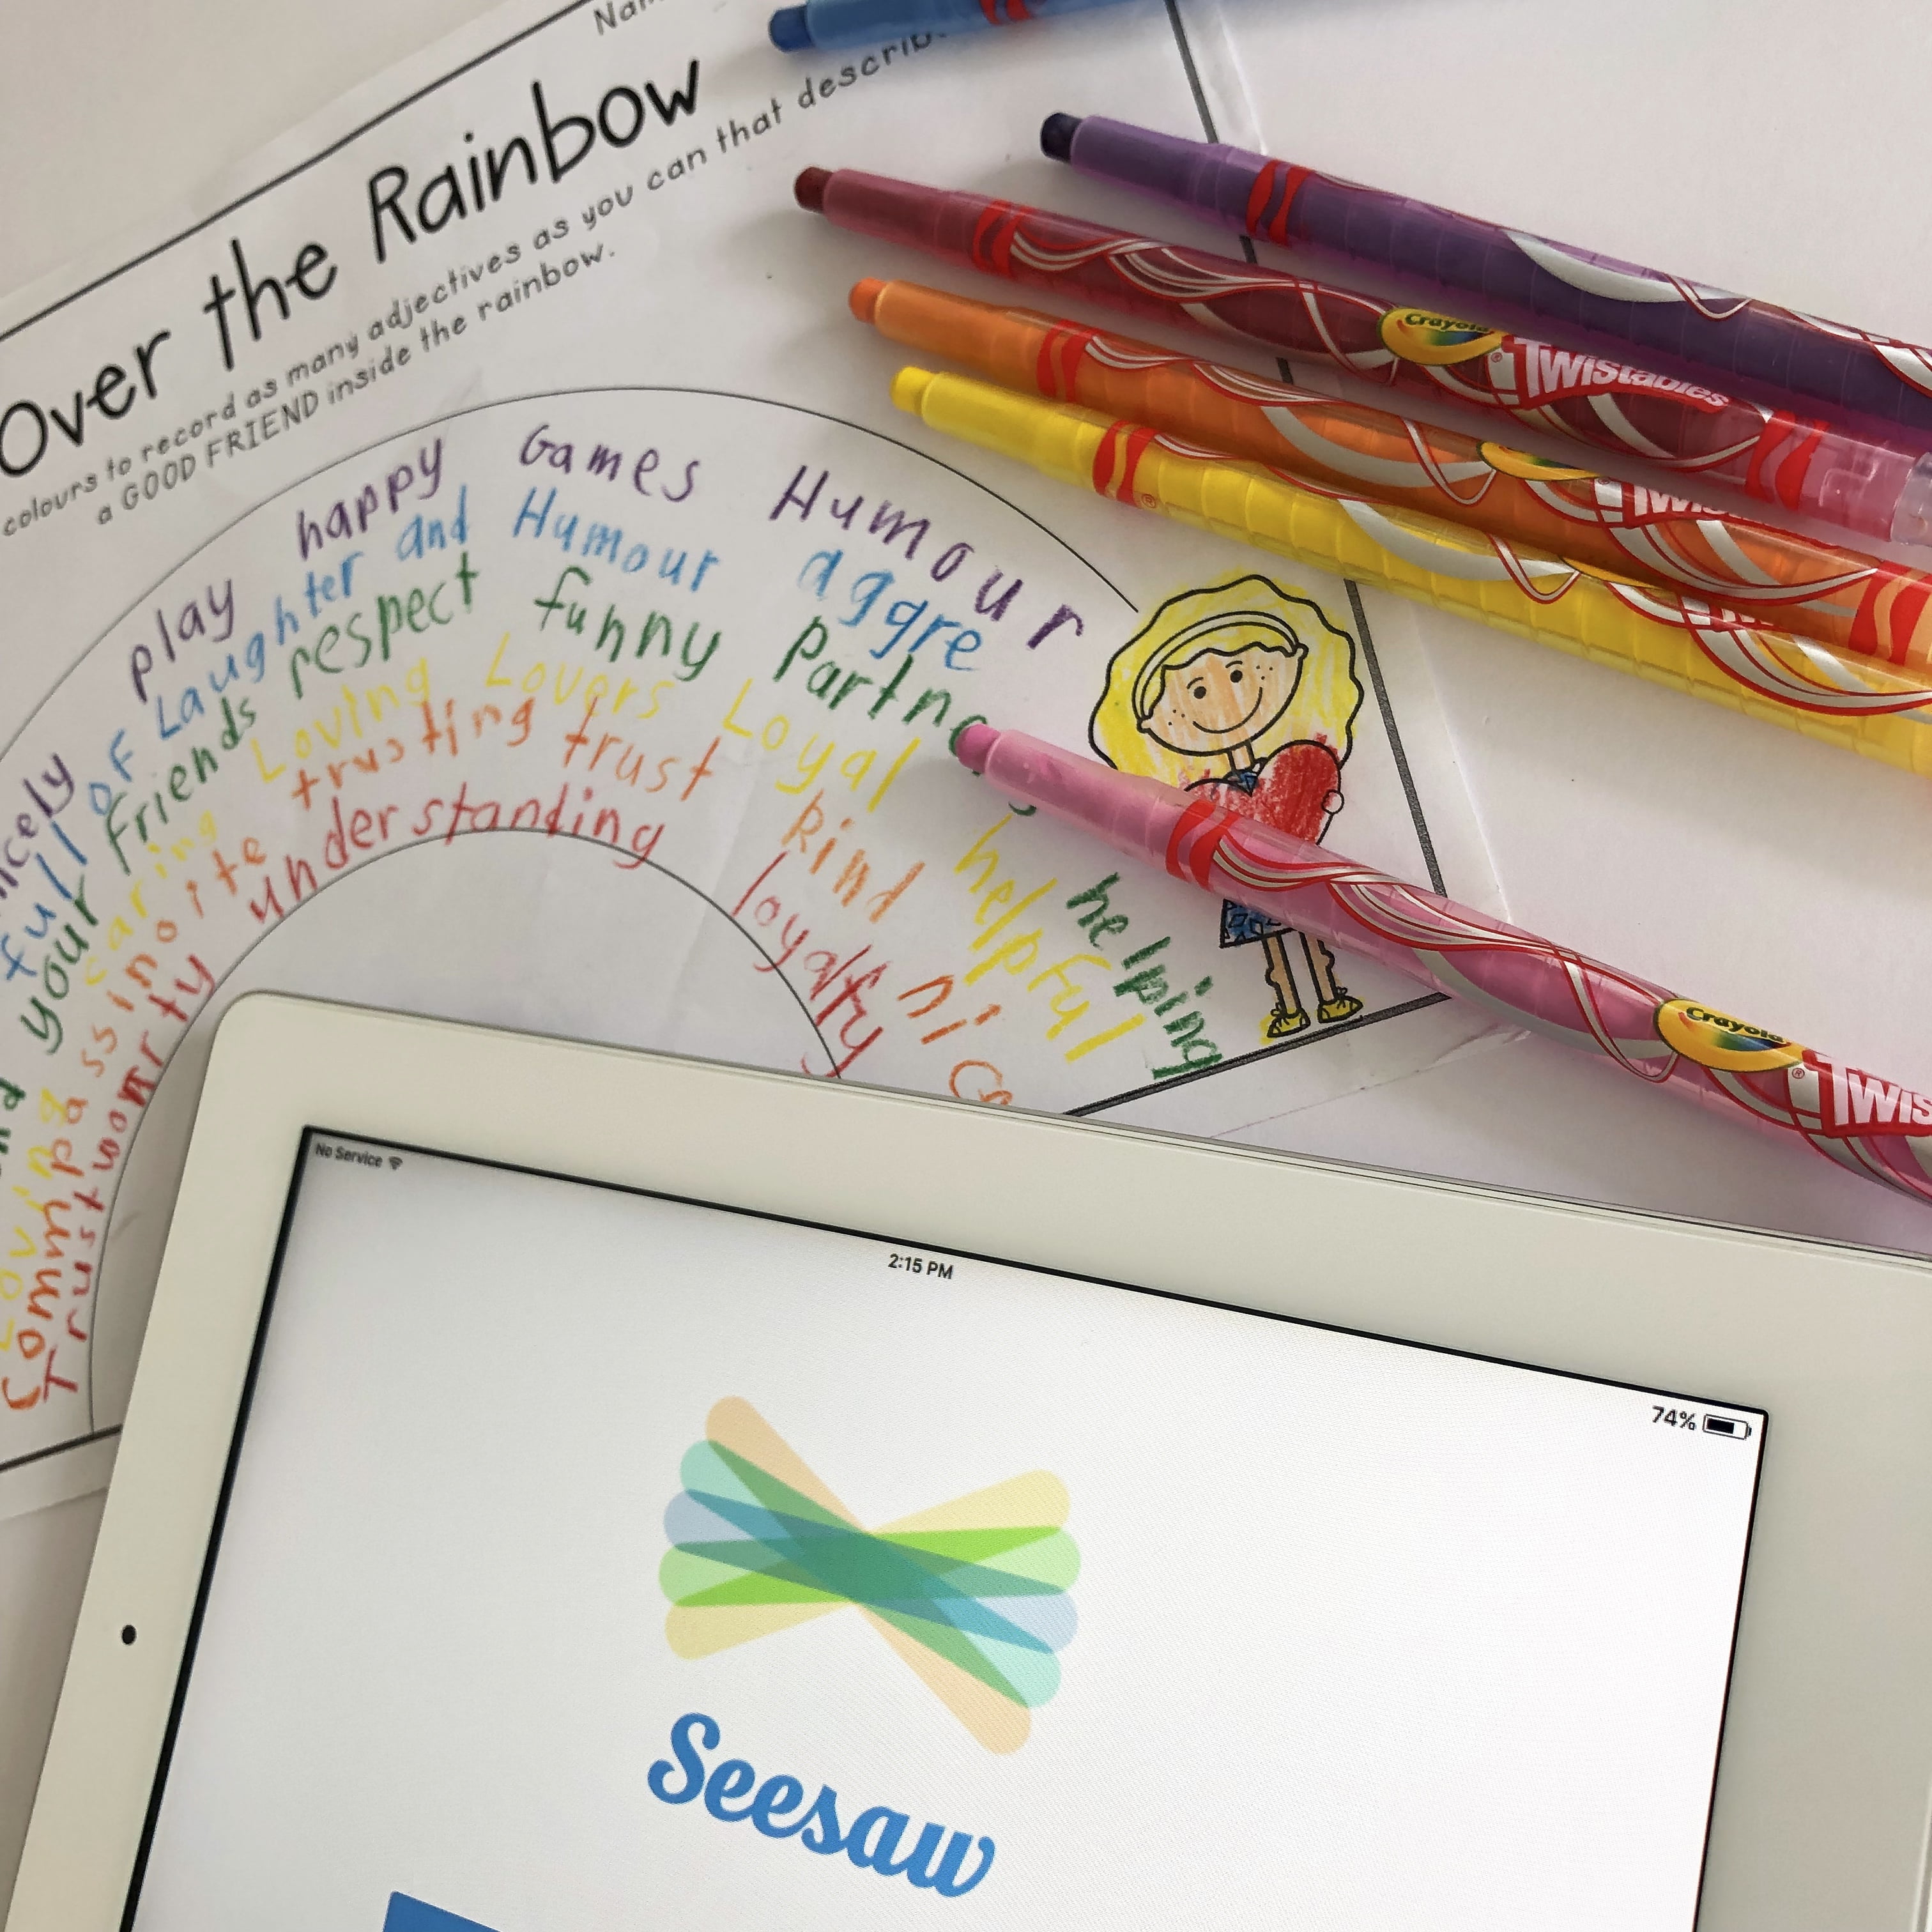 10 Considerations when Planning an Authentic Assessment - Rainbow Sky Creations